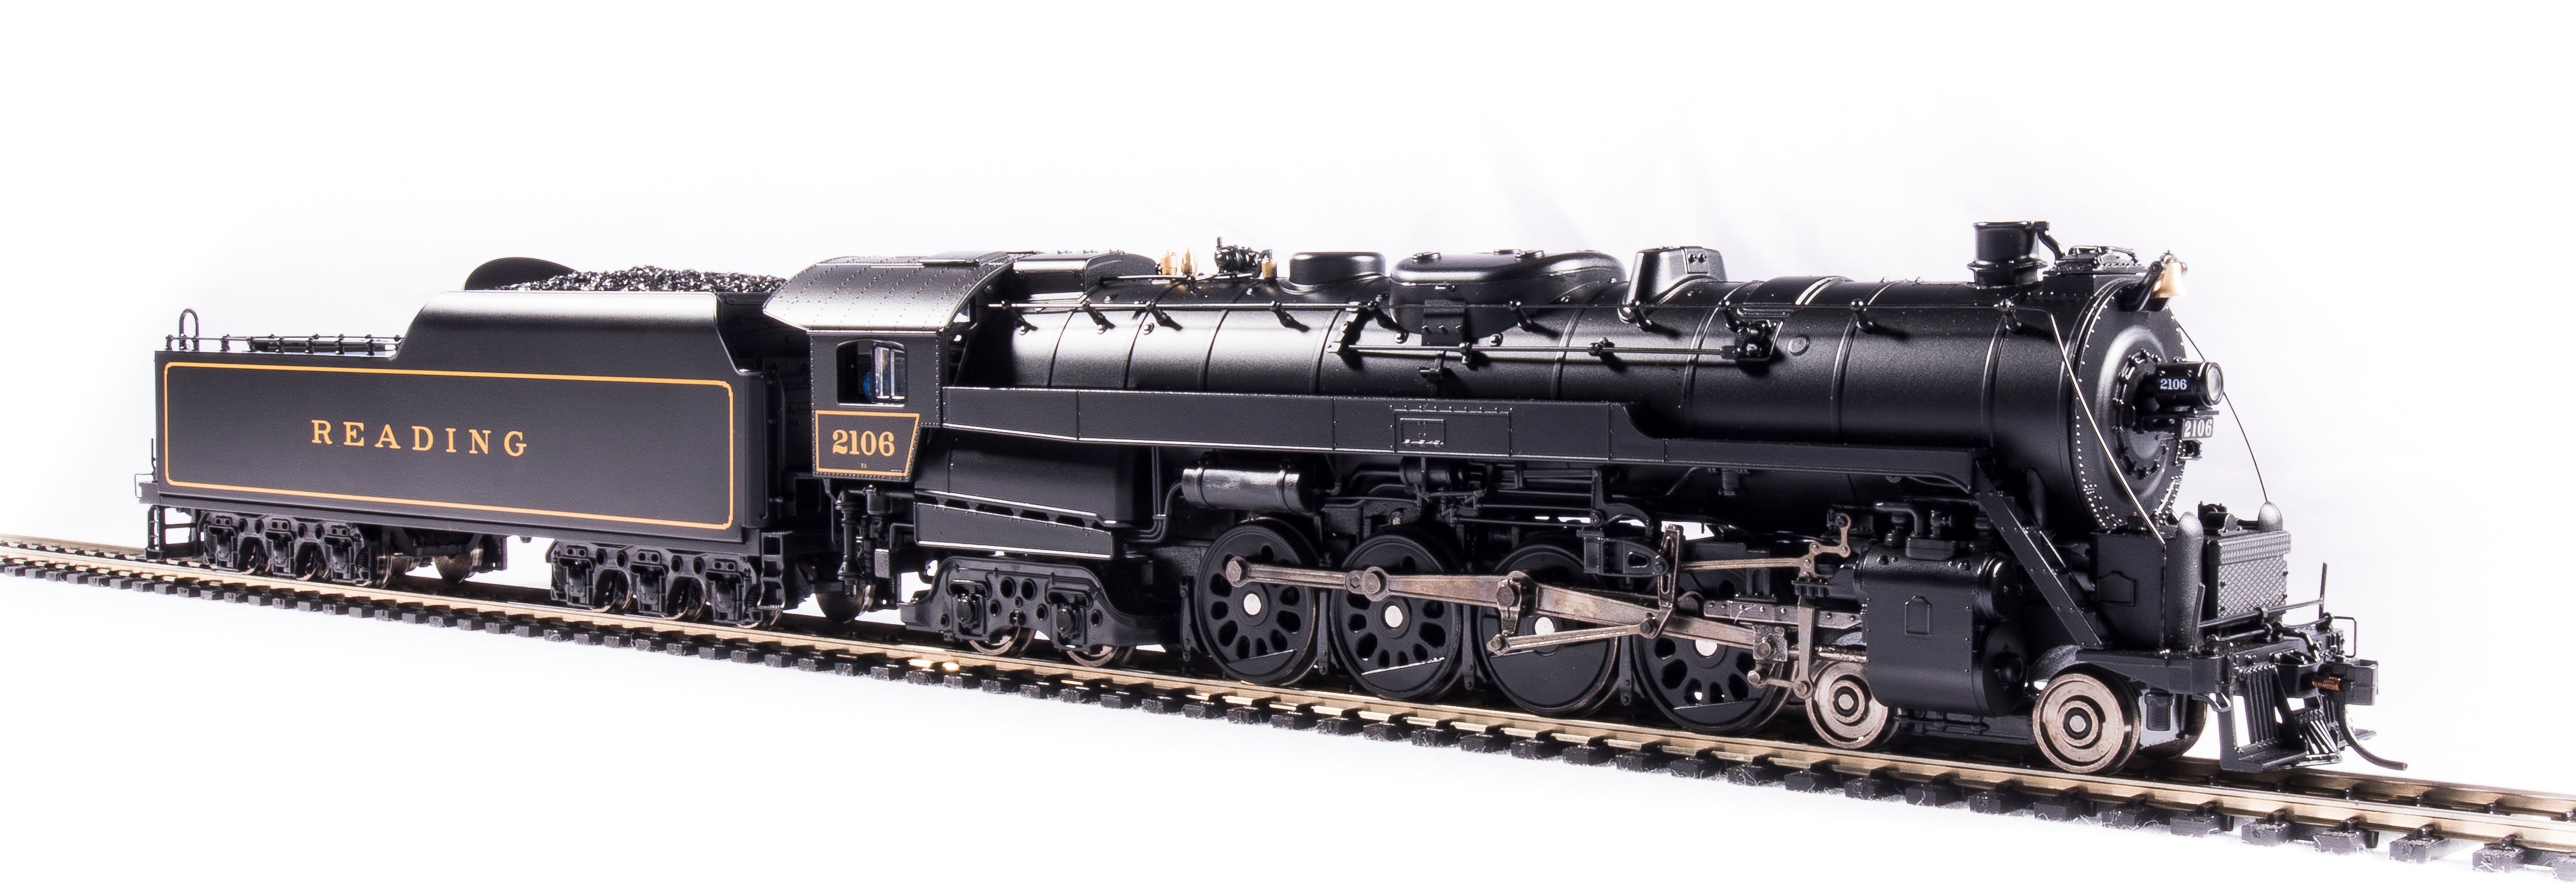 6801 Reading T1 4-8-4, In Service Version #2106, Paragon4 Sound/DC/DCC, Smoke, HO